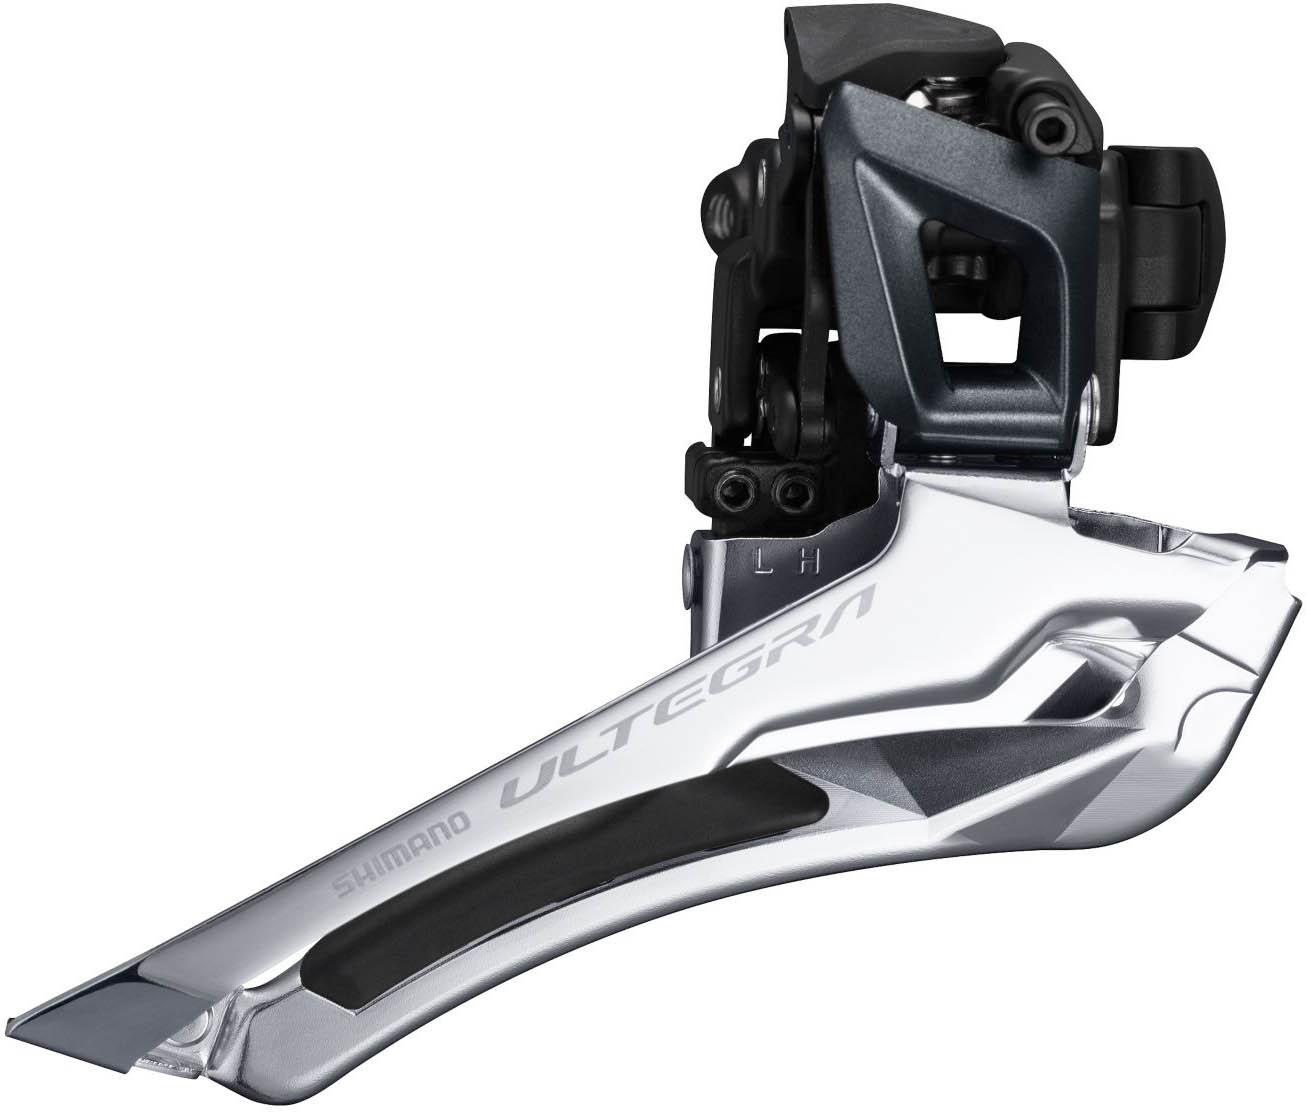 Shimano Ultegra R8000 11 Speed Band On Front Derailleur  Grey